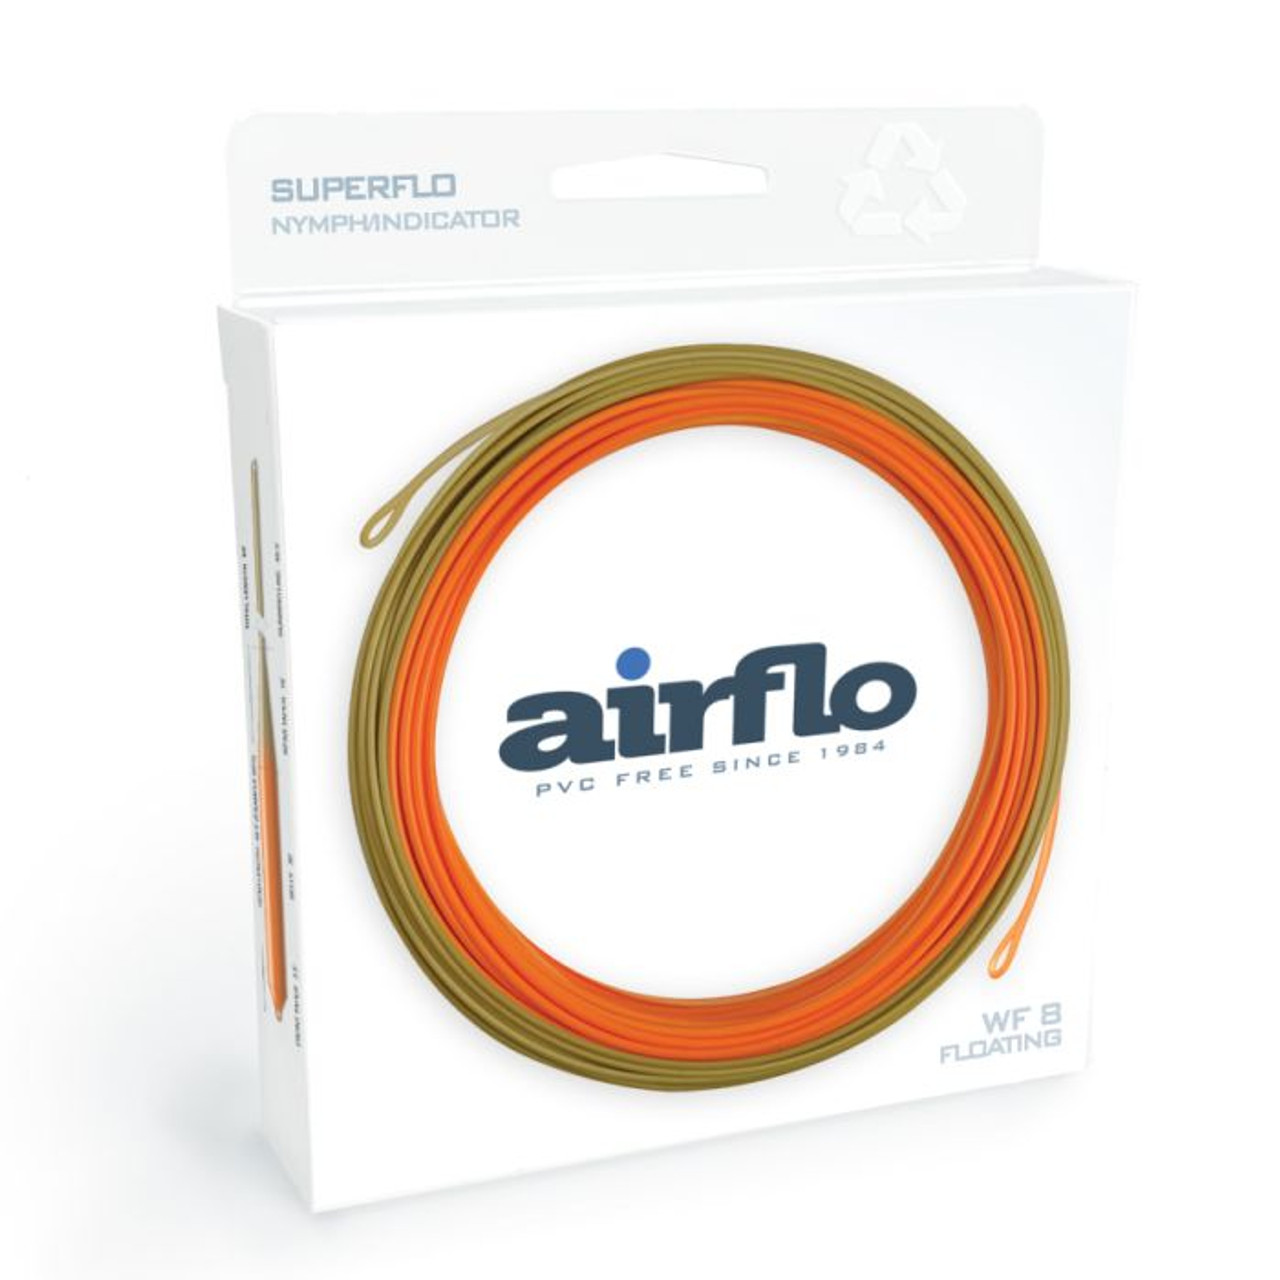 Airflo Superflo Kelly Gallop Nymph Indicator Fly Line